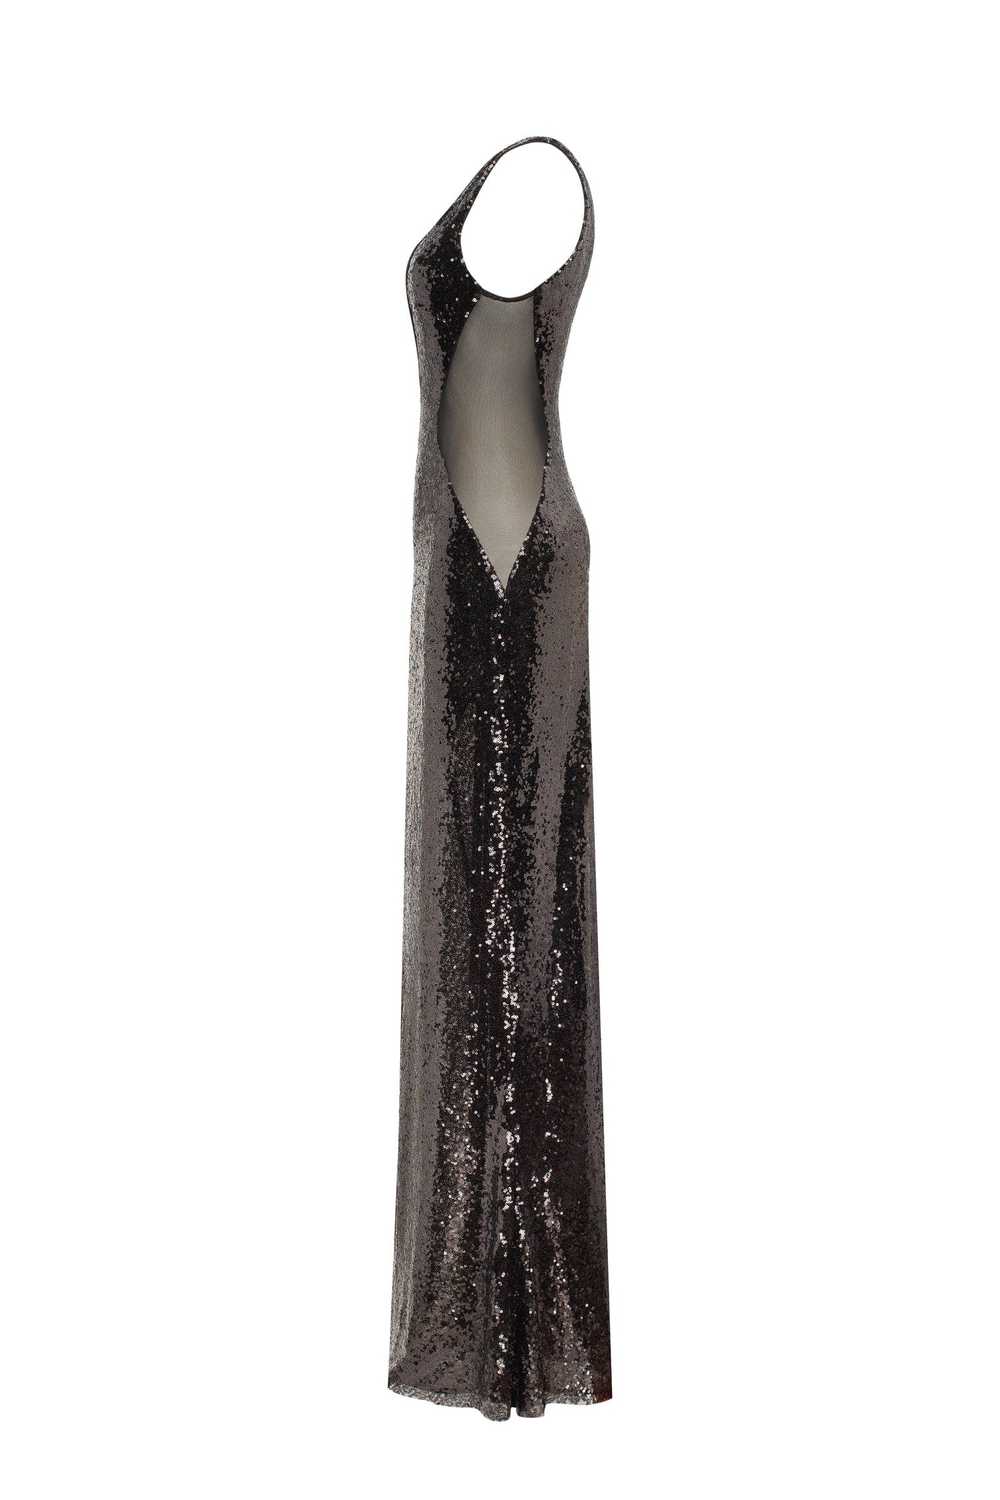 Milla Dazzling fully sequined black maxi dress, S… - image 7